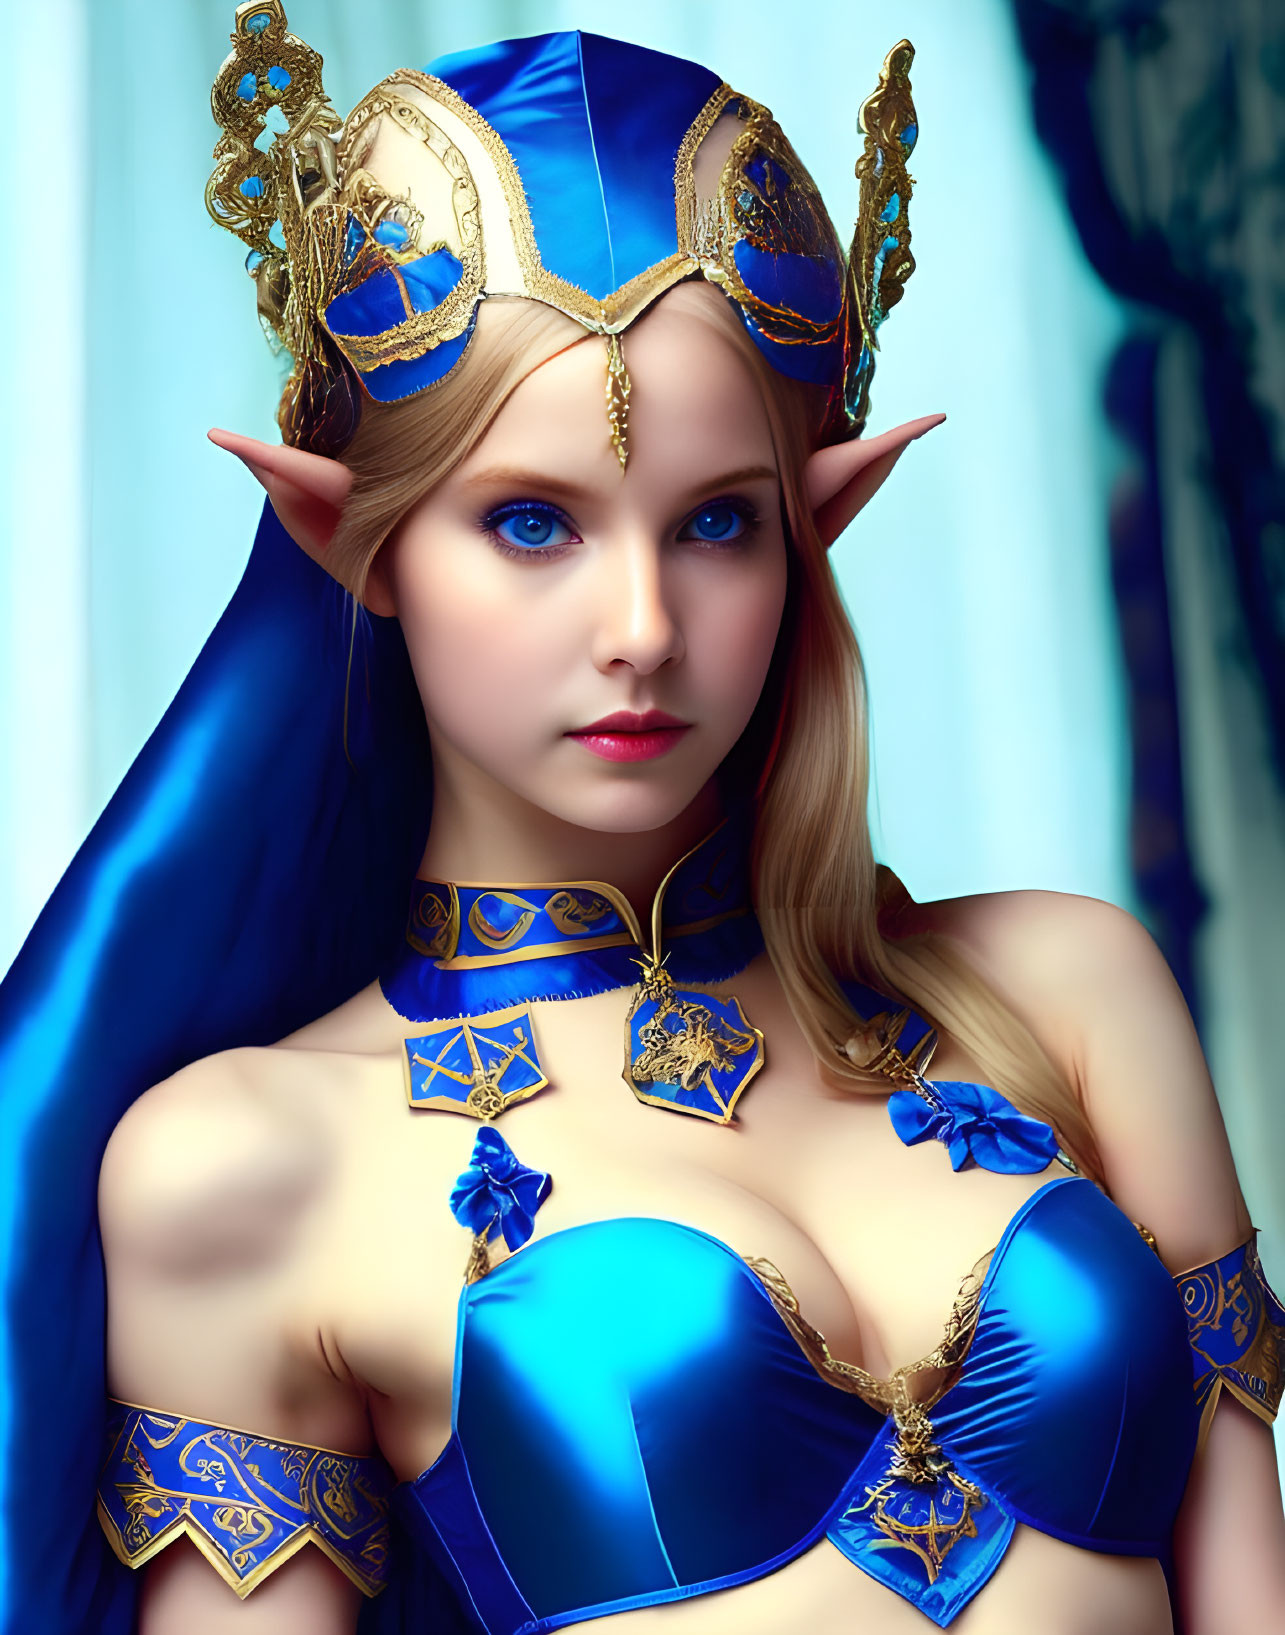 Fantasy female character with pointed ears and blue attire in intense gaze